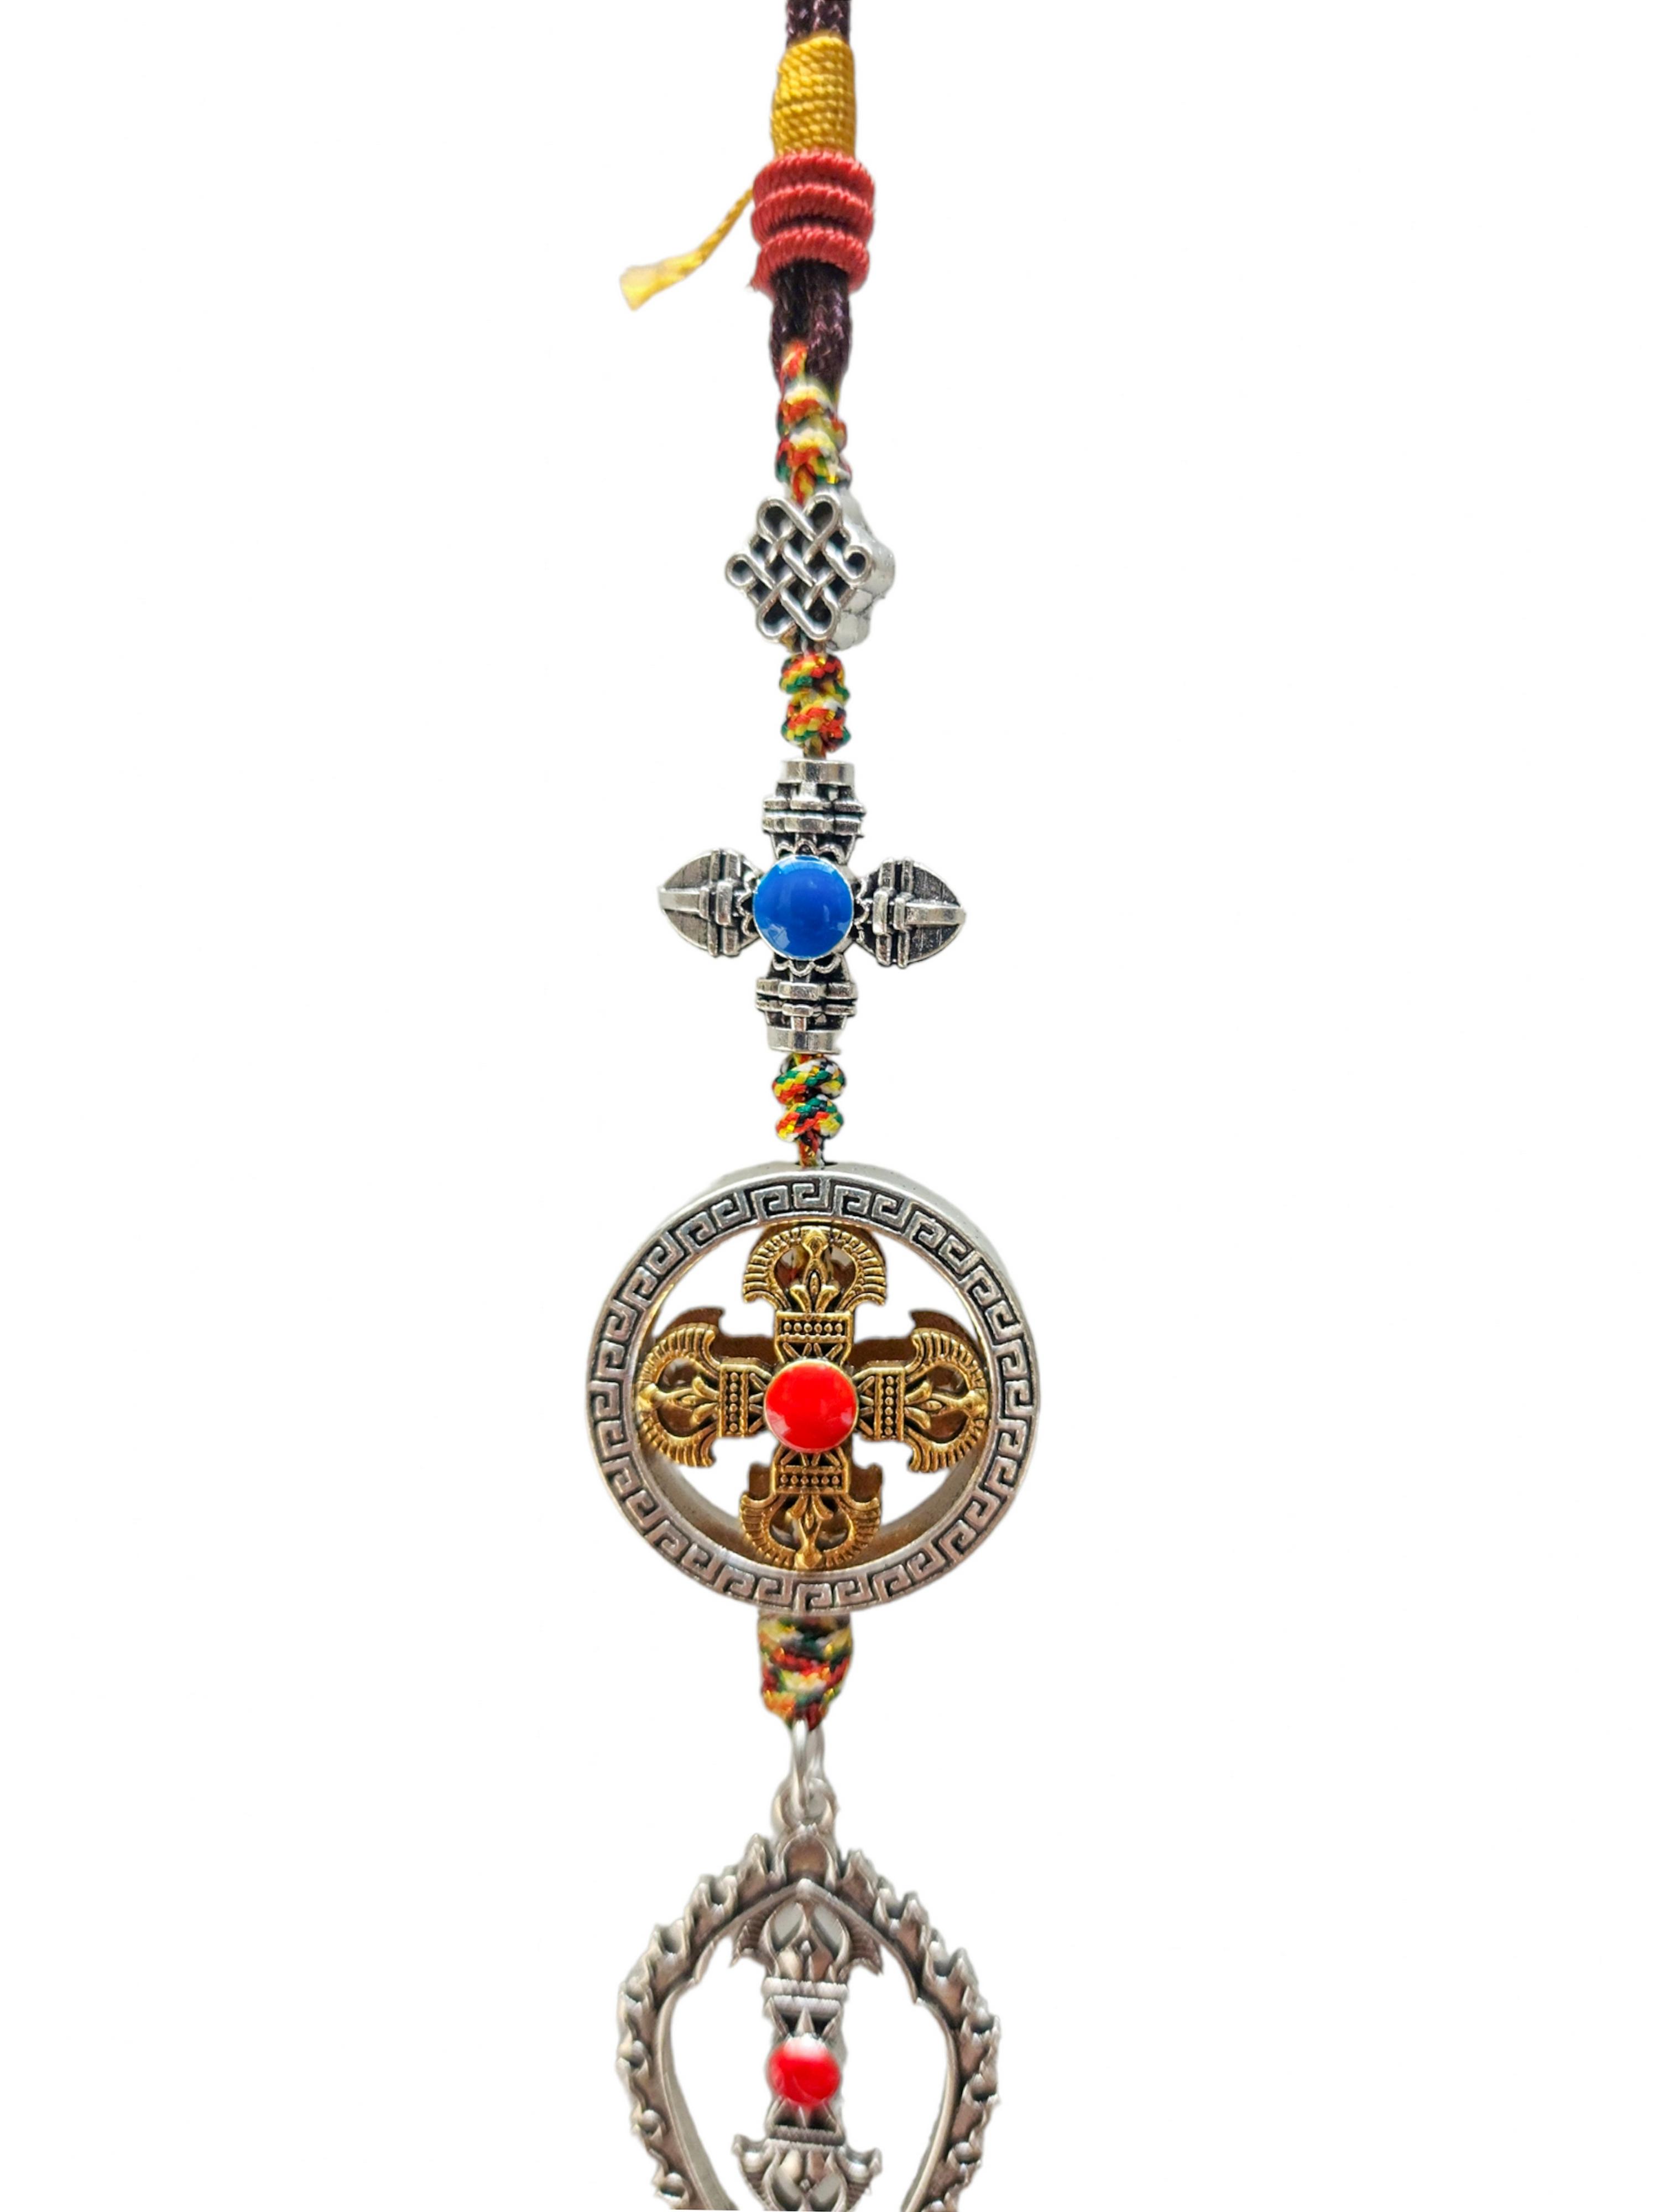 Buddhist Ritual Amulet Hanging With Double Dorje And Dorje, For Wall, Altar, Bags And Keyring